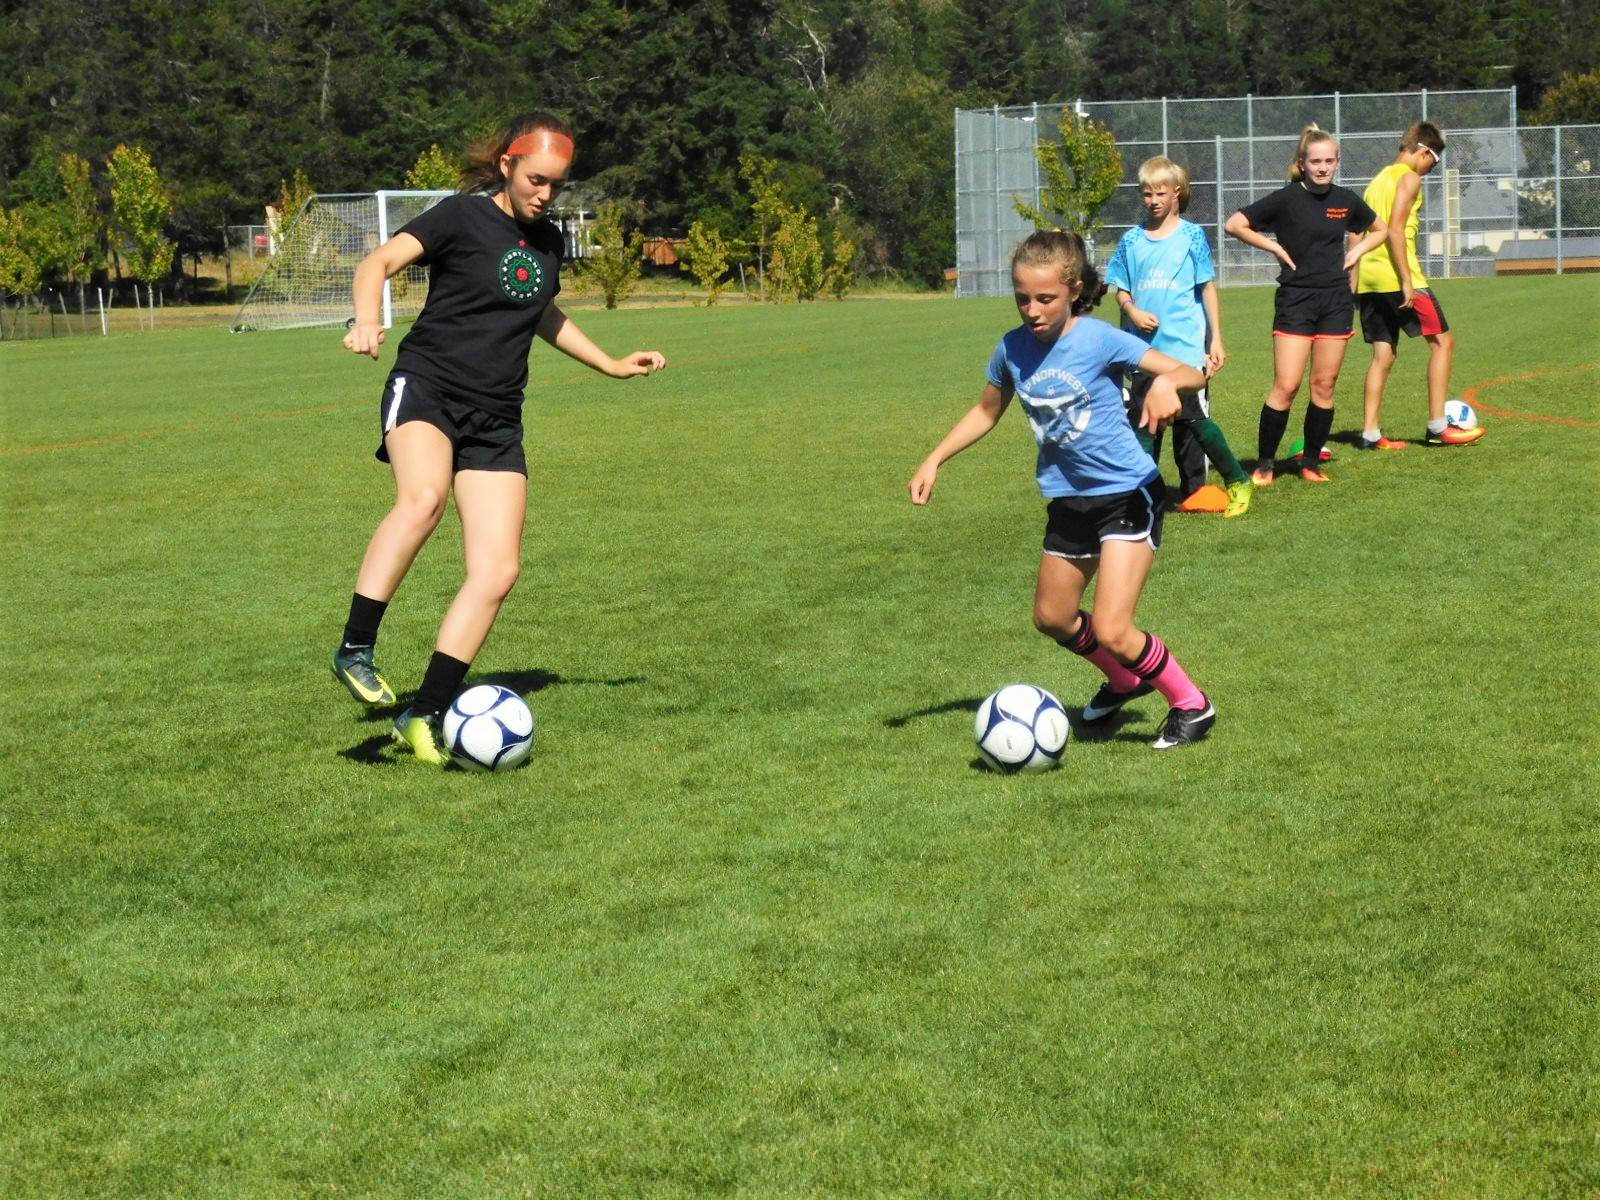 Island Rec offers technical soccer training